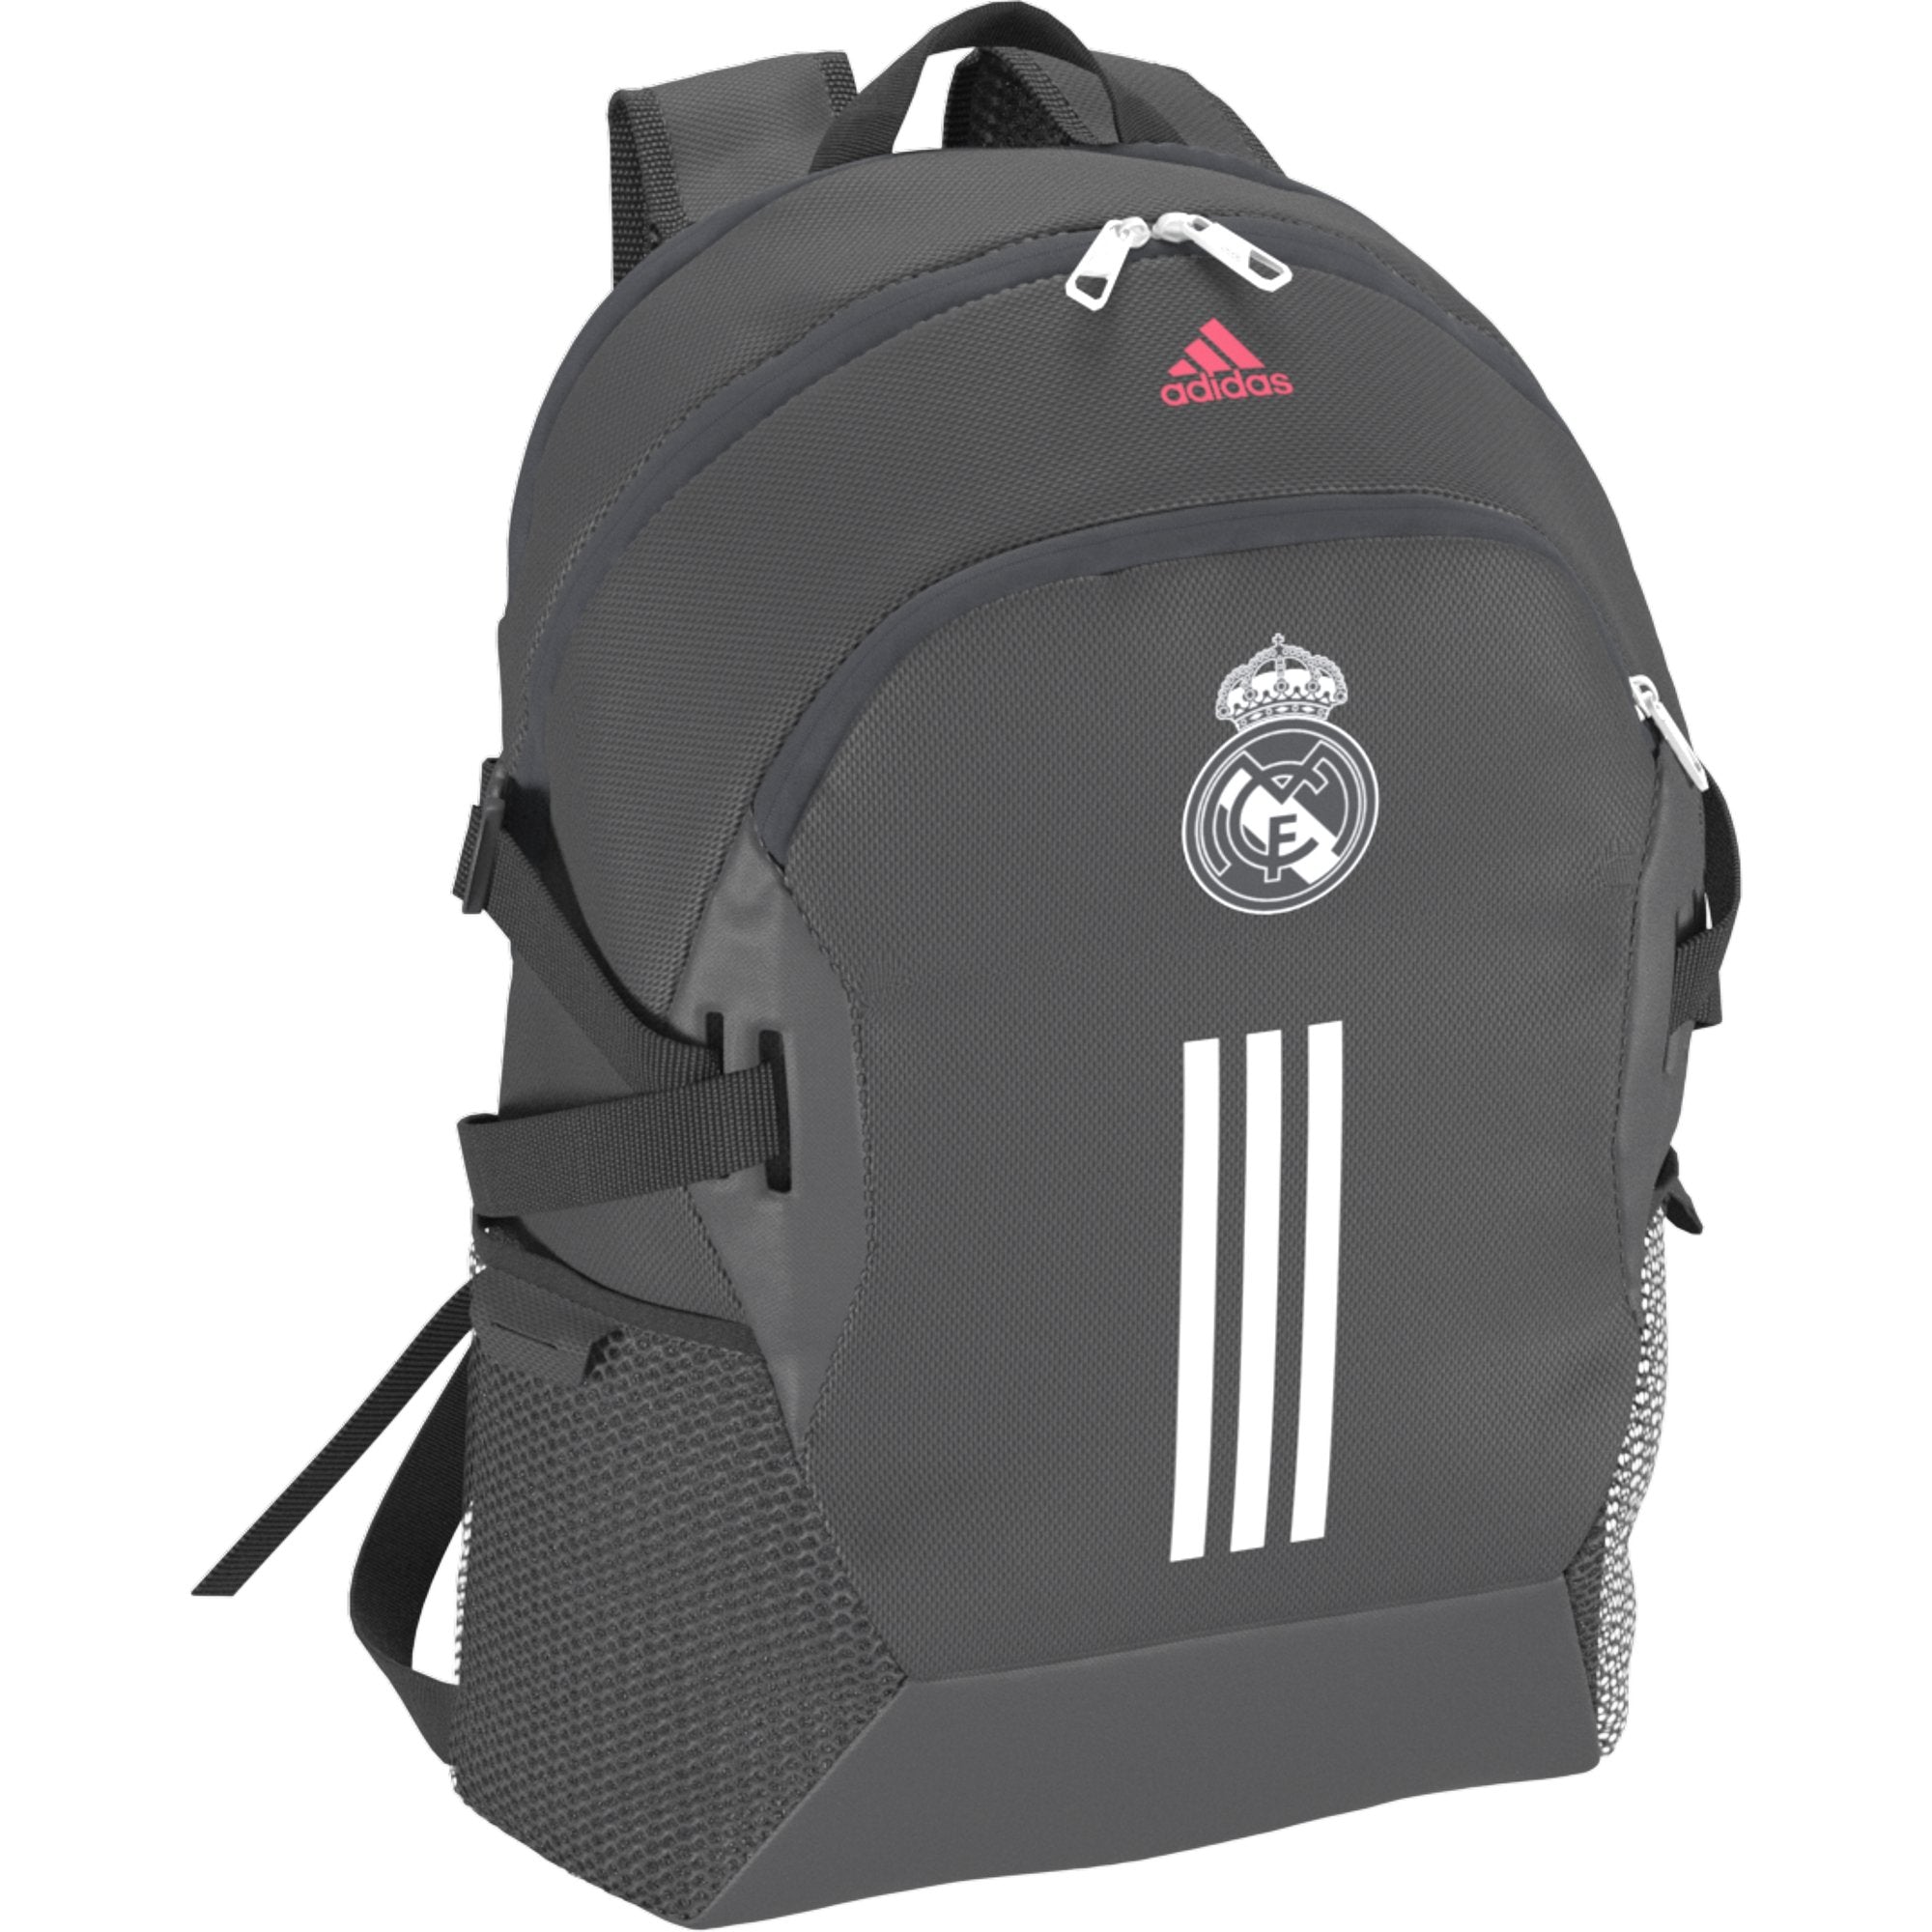 grey and white adidas backpack